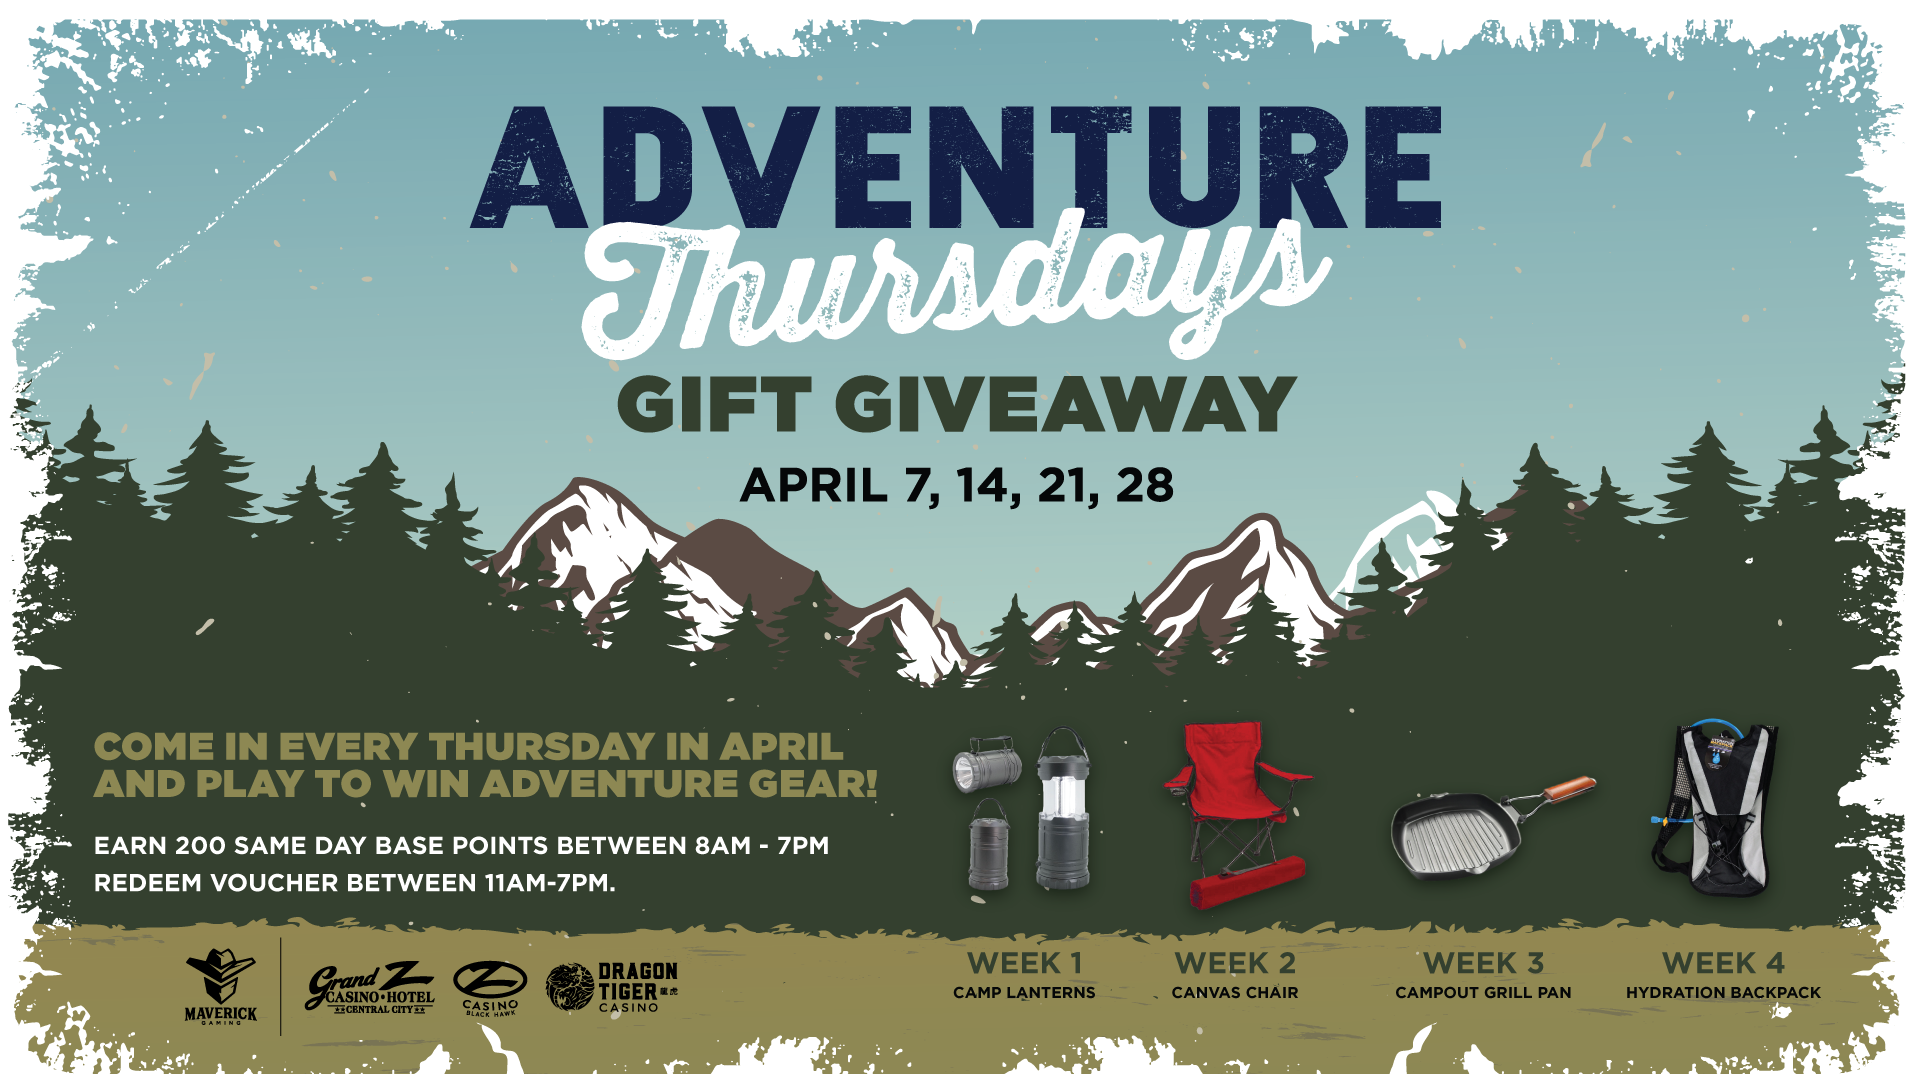 Adventure Thursdays Gift Giveaway